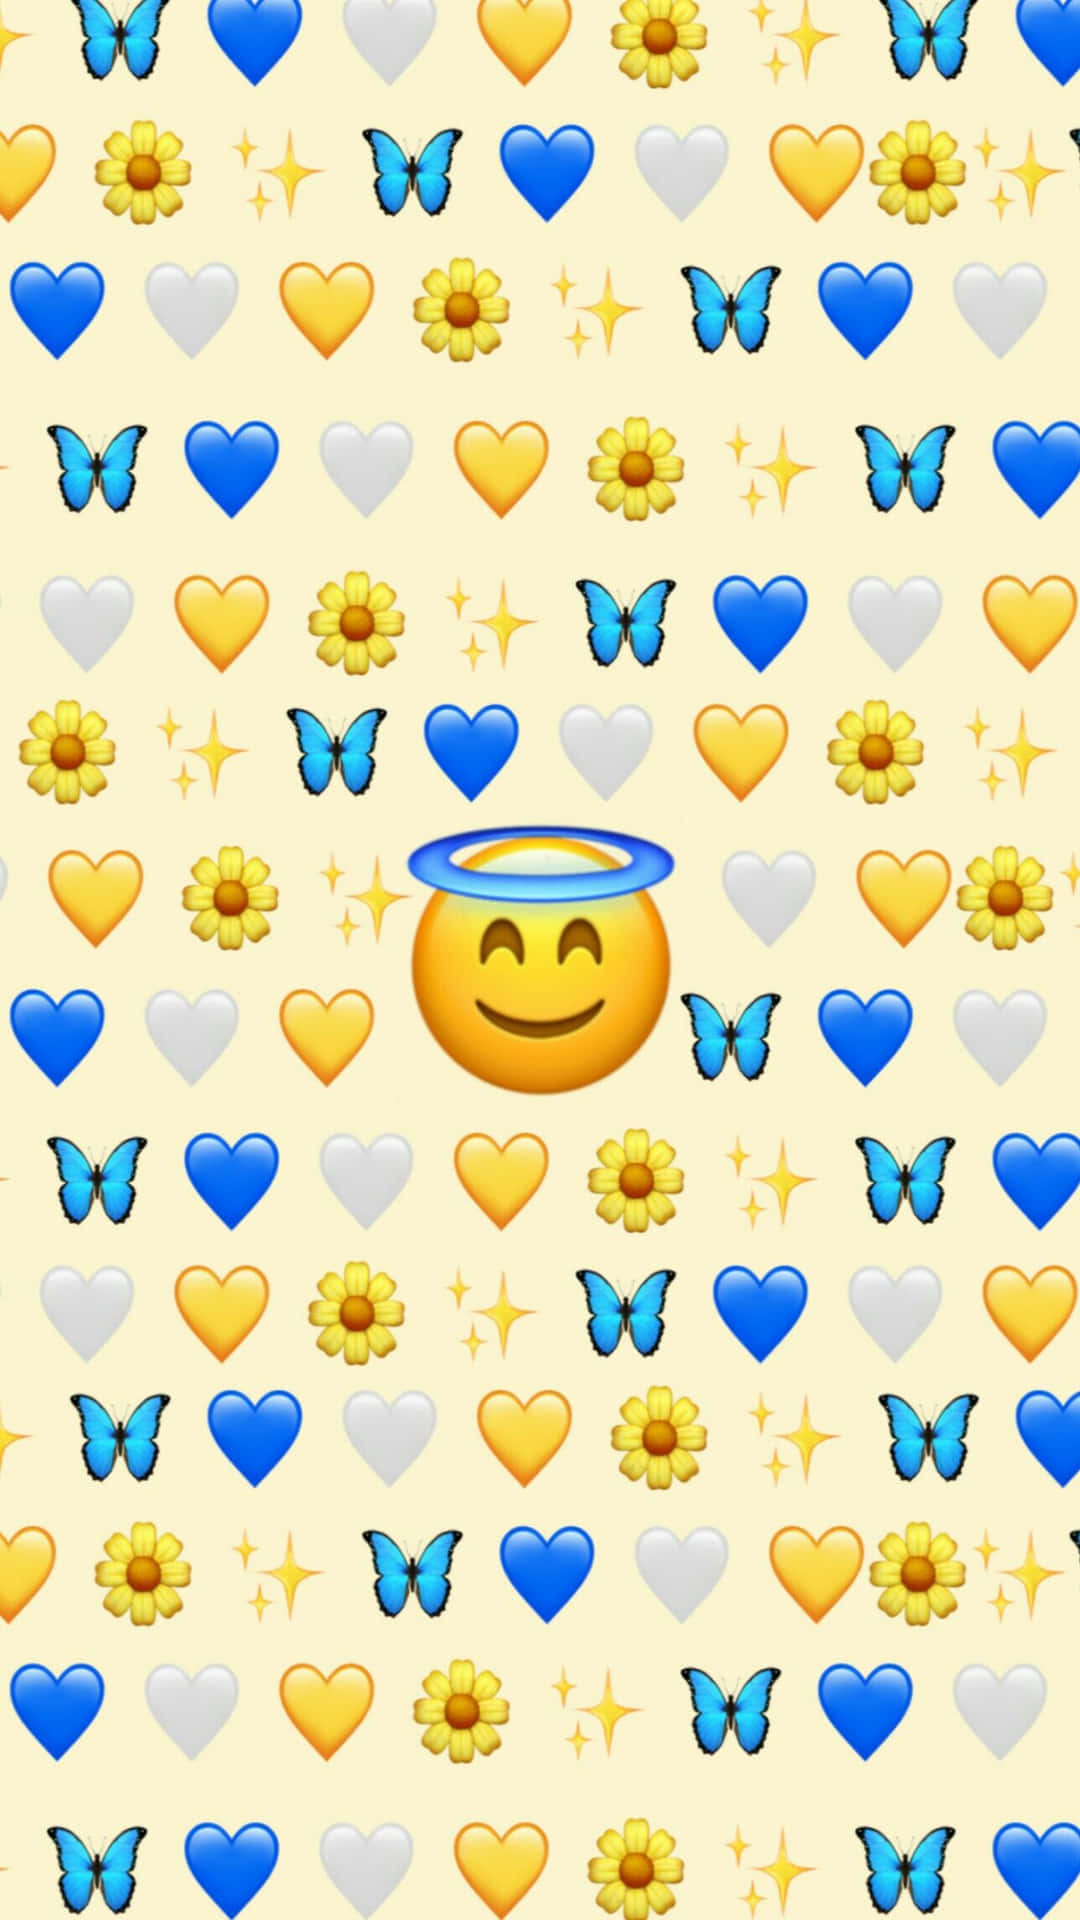 500+ emoji cute wallpaper For all the emoji lovers out there